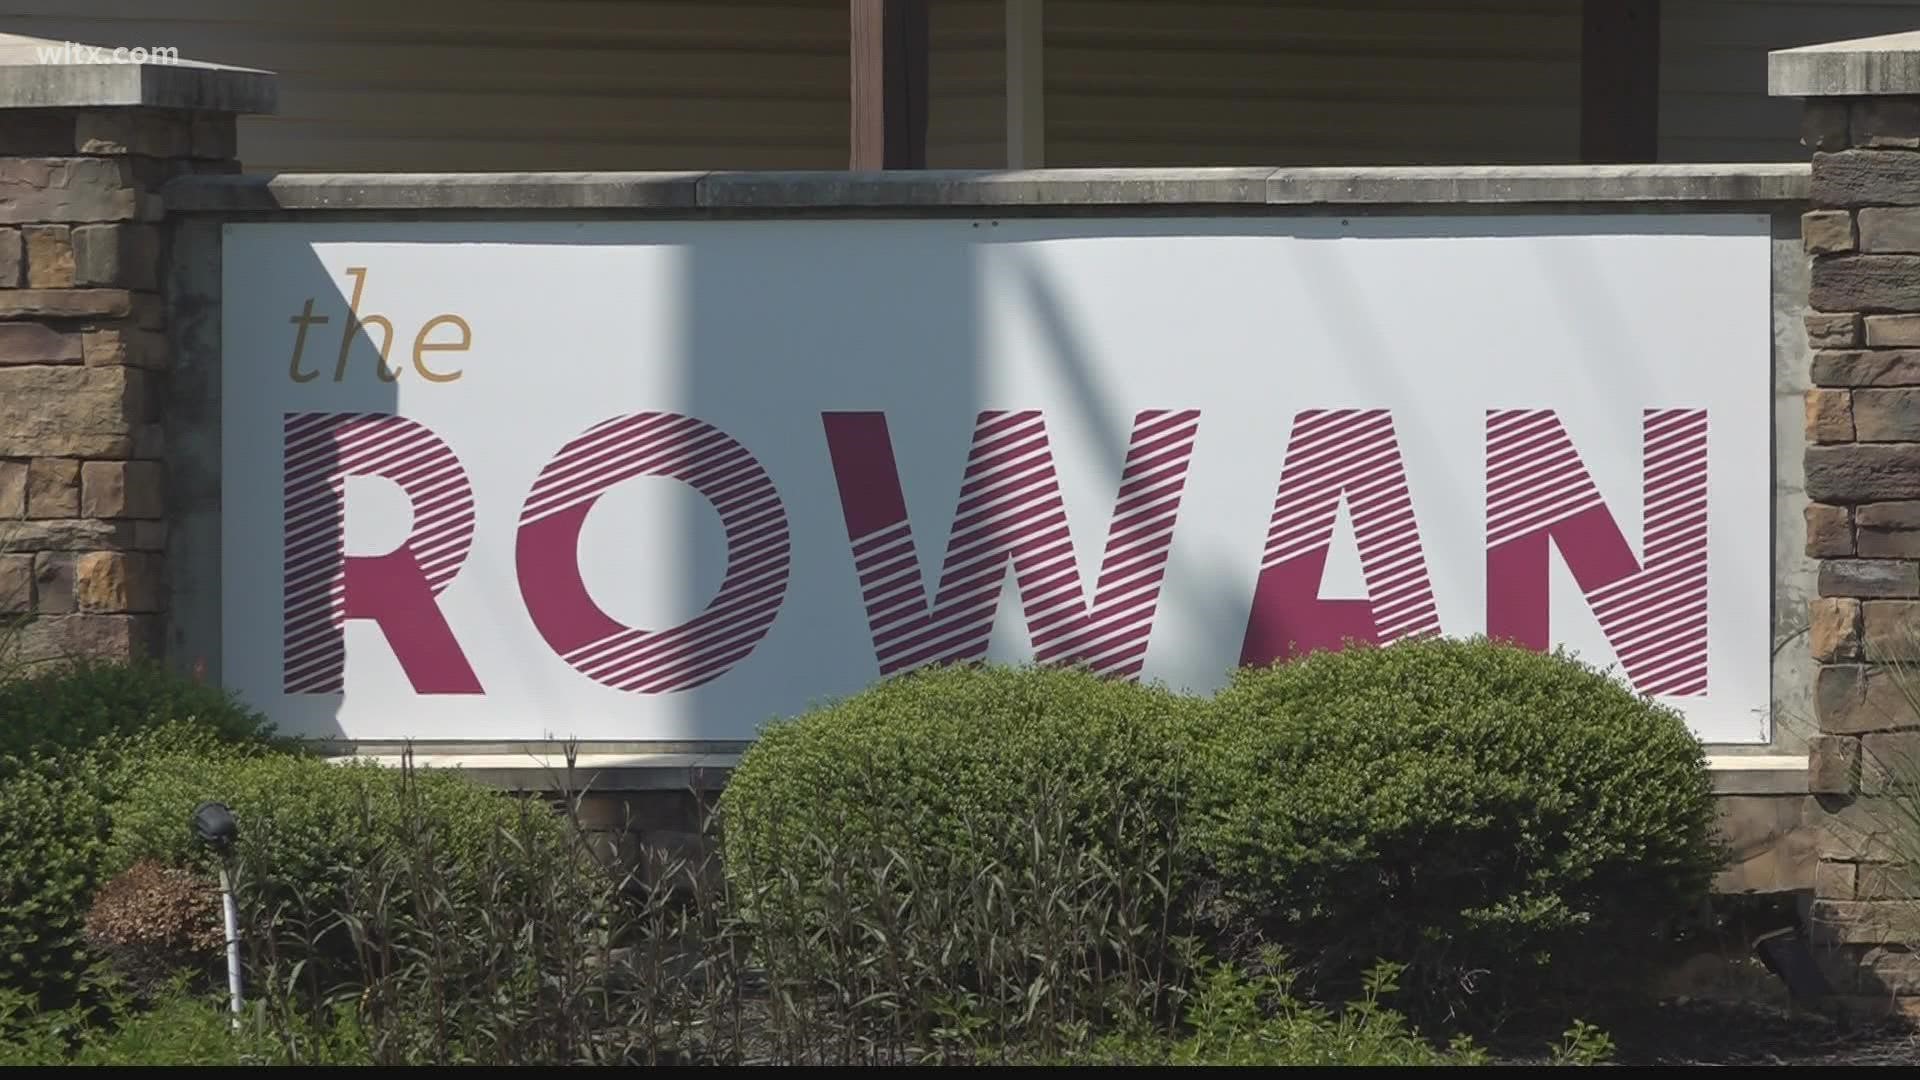 Students moving in at Rowan Apartments off Shop Road find "filthy" living conditions